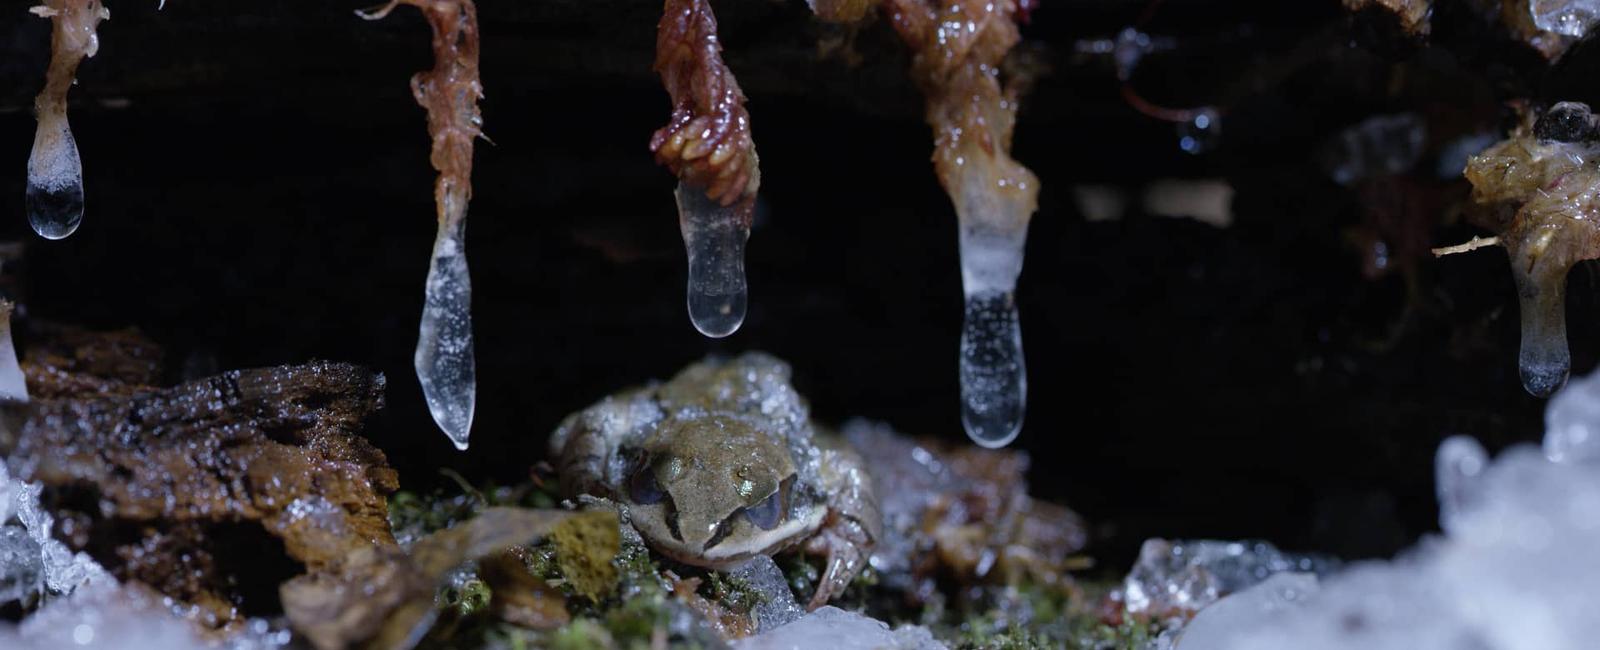 Certain frogs can be frozen solid then thawed and continue living